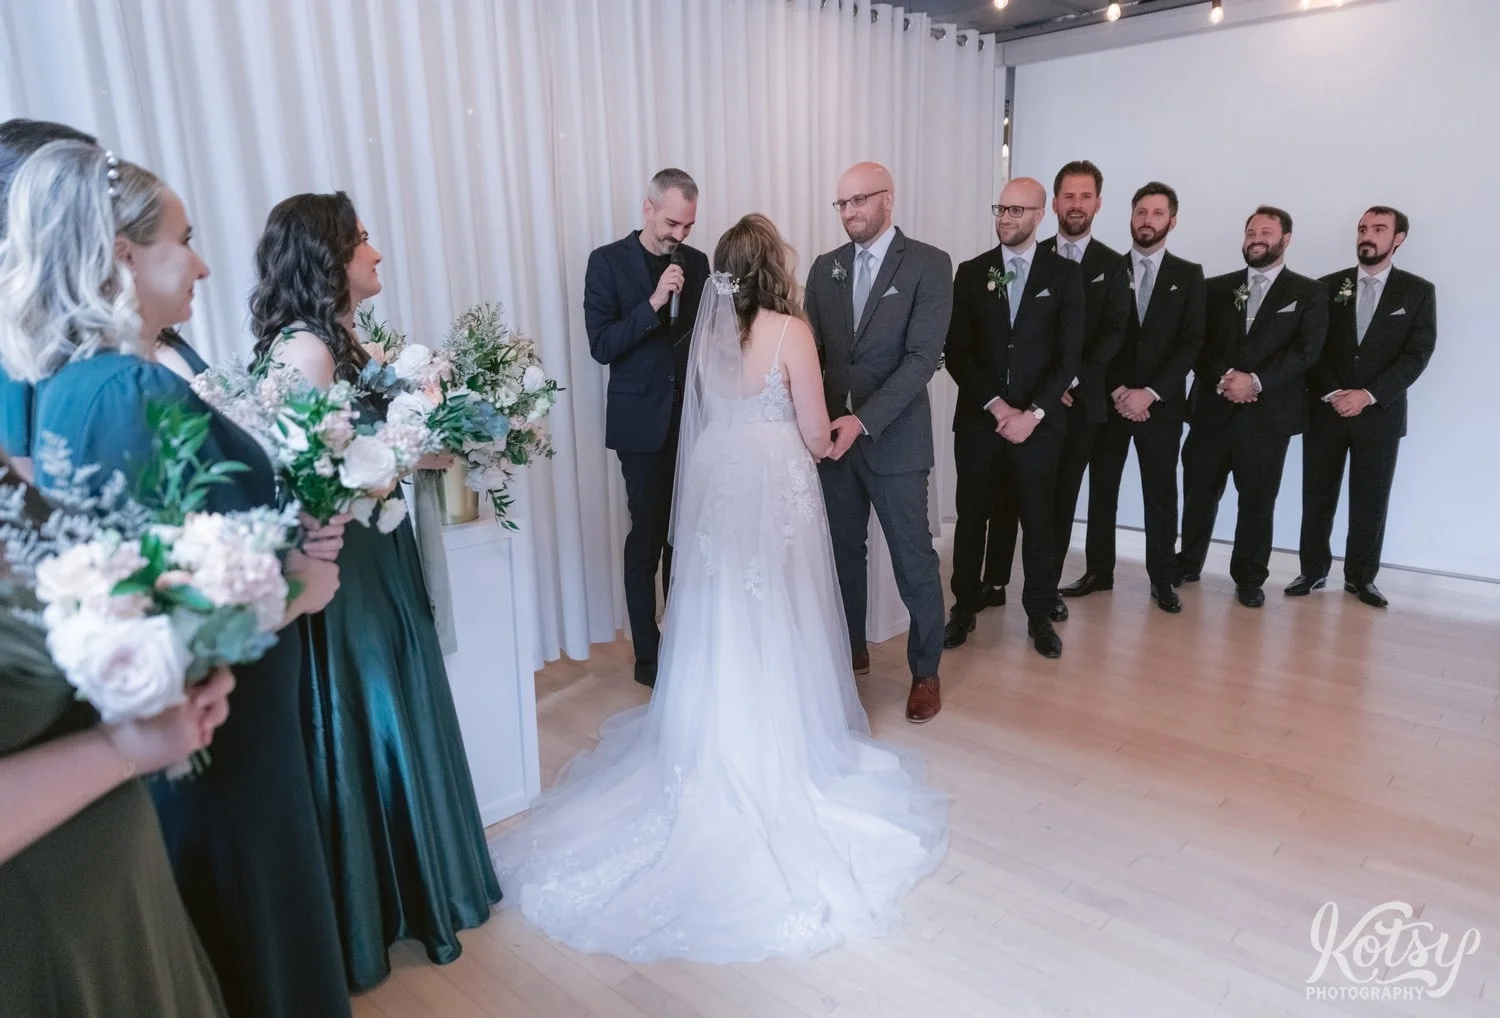 A wide shot of a groom in a gray suit and green tie looking at his bride in a white bridal gown with groomsmen behind him during his Second Floor Events wedding ceremony in Toronto, Canada